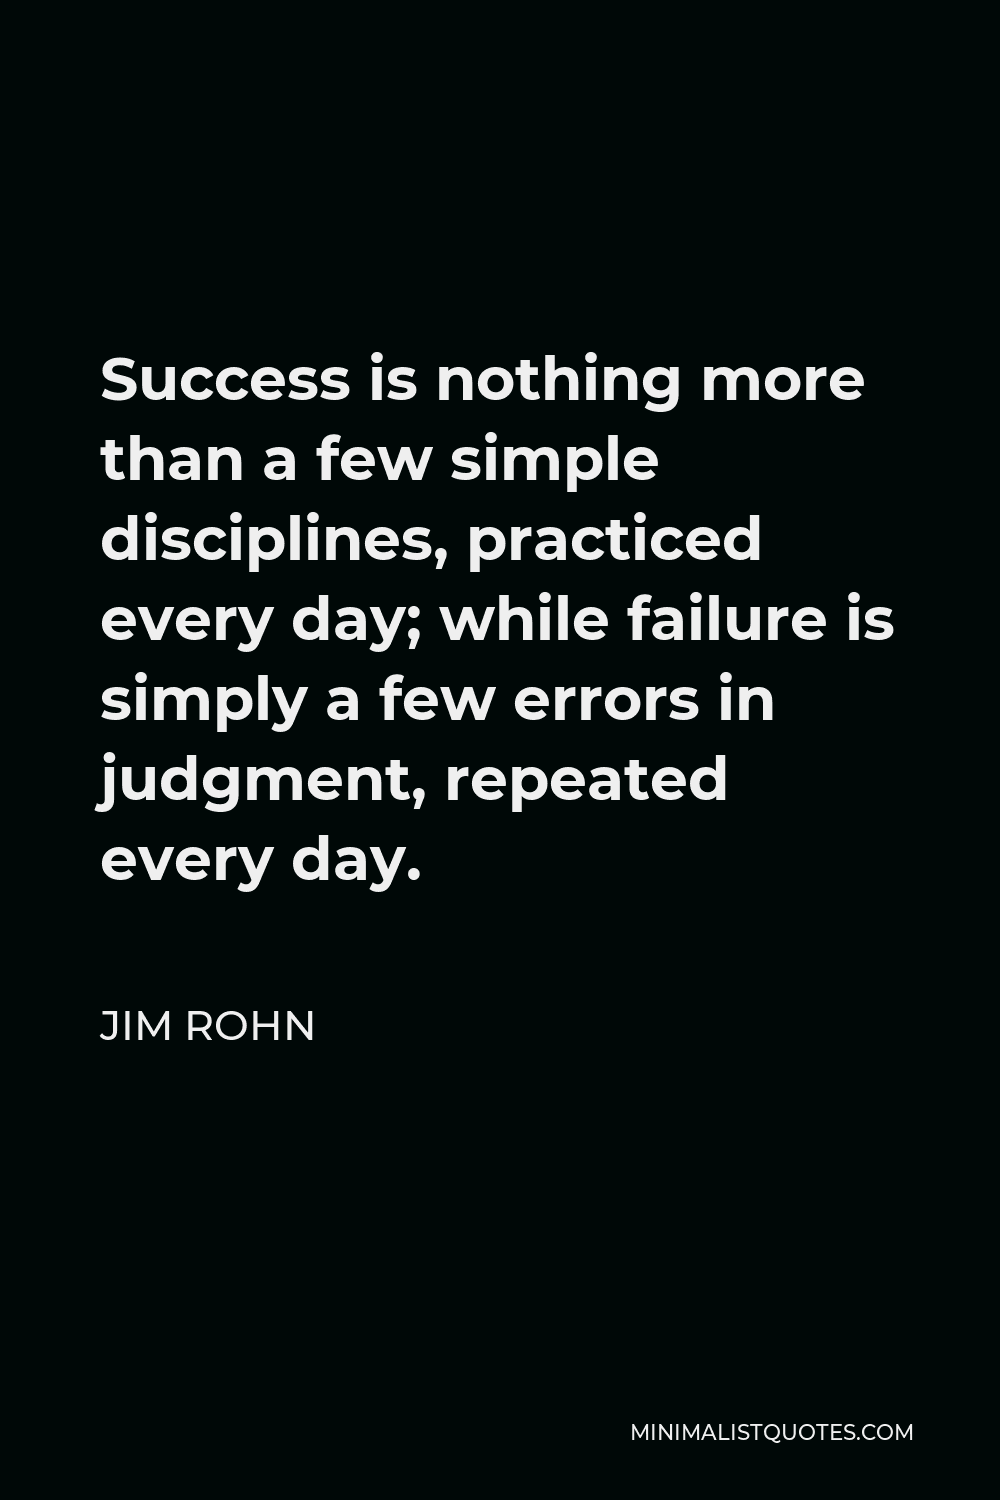 Jim Rohn Quote - Success is nothing more than a few simple disciplines, practiced every day; while failure is simply a few errors in judgment, repeated every day.